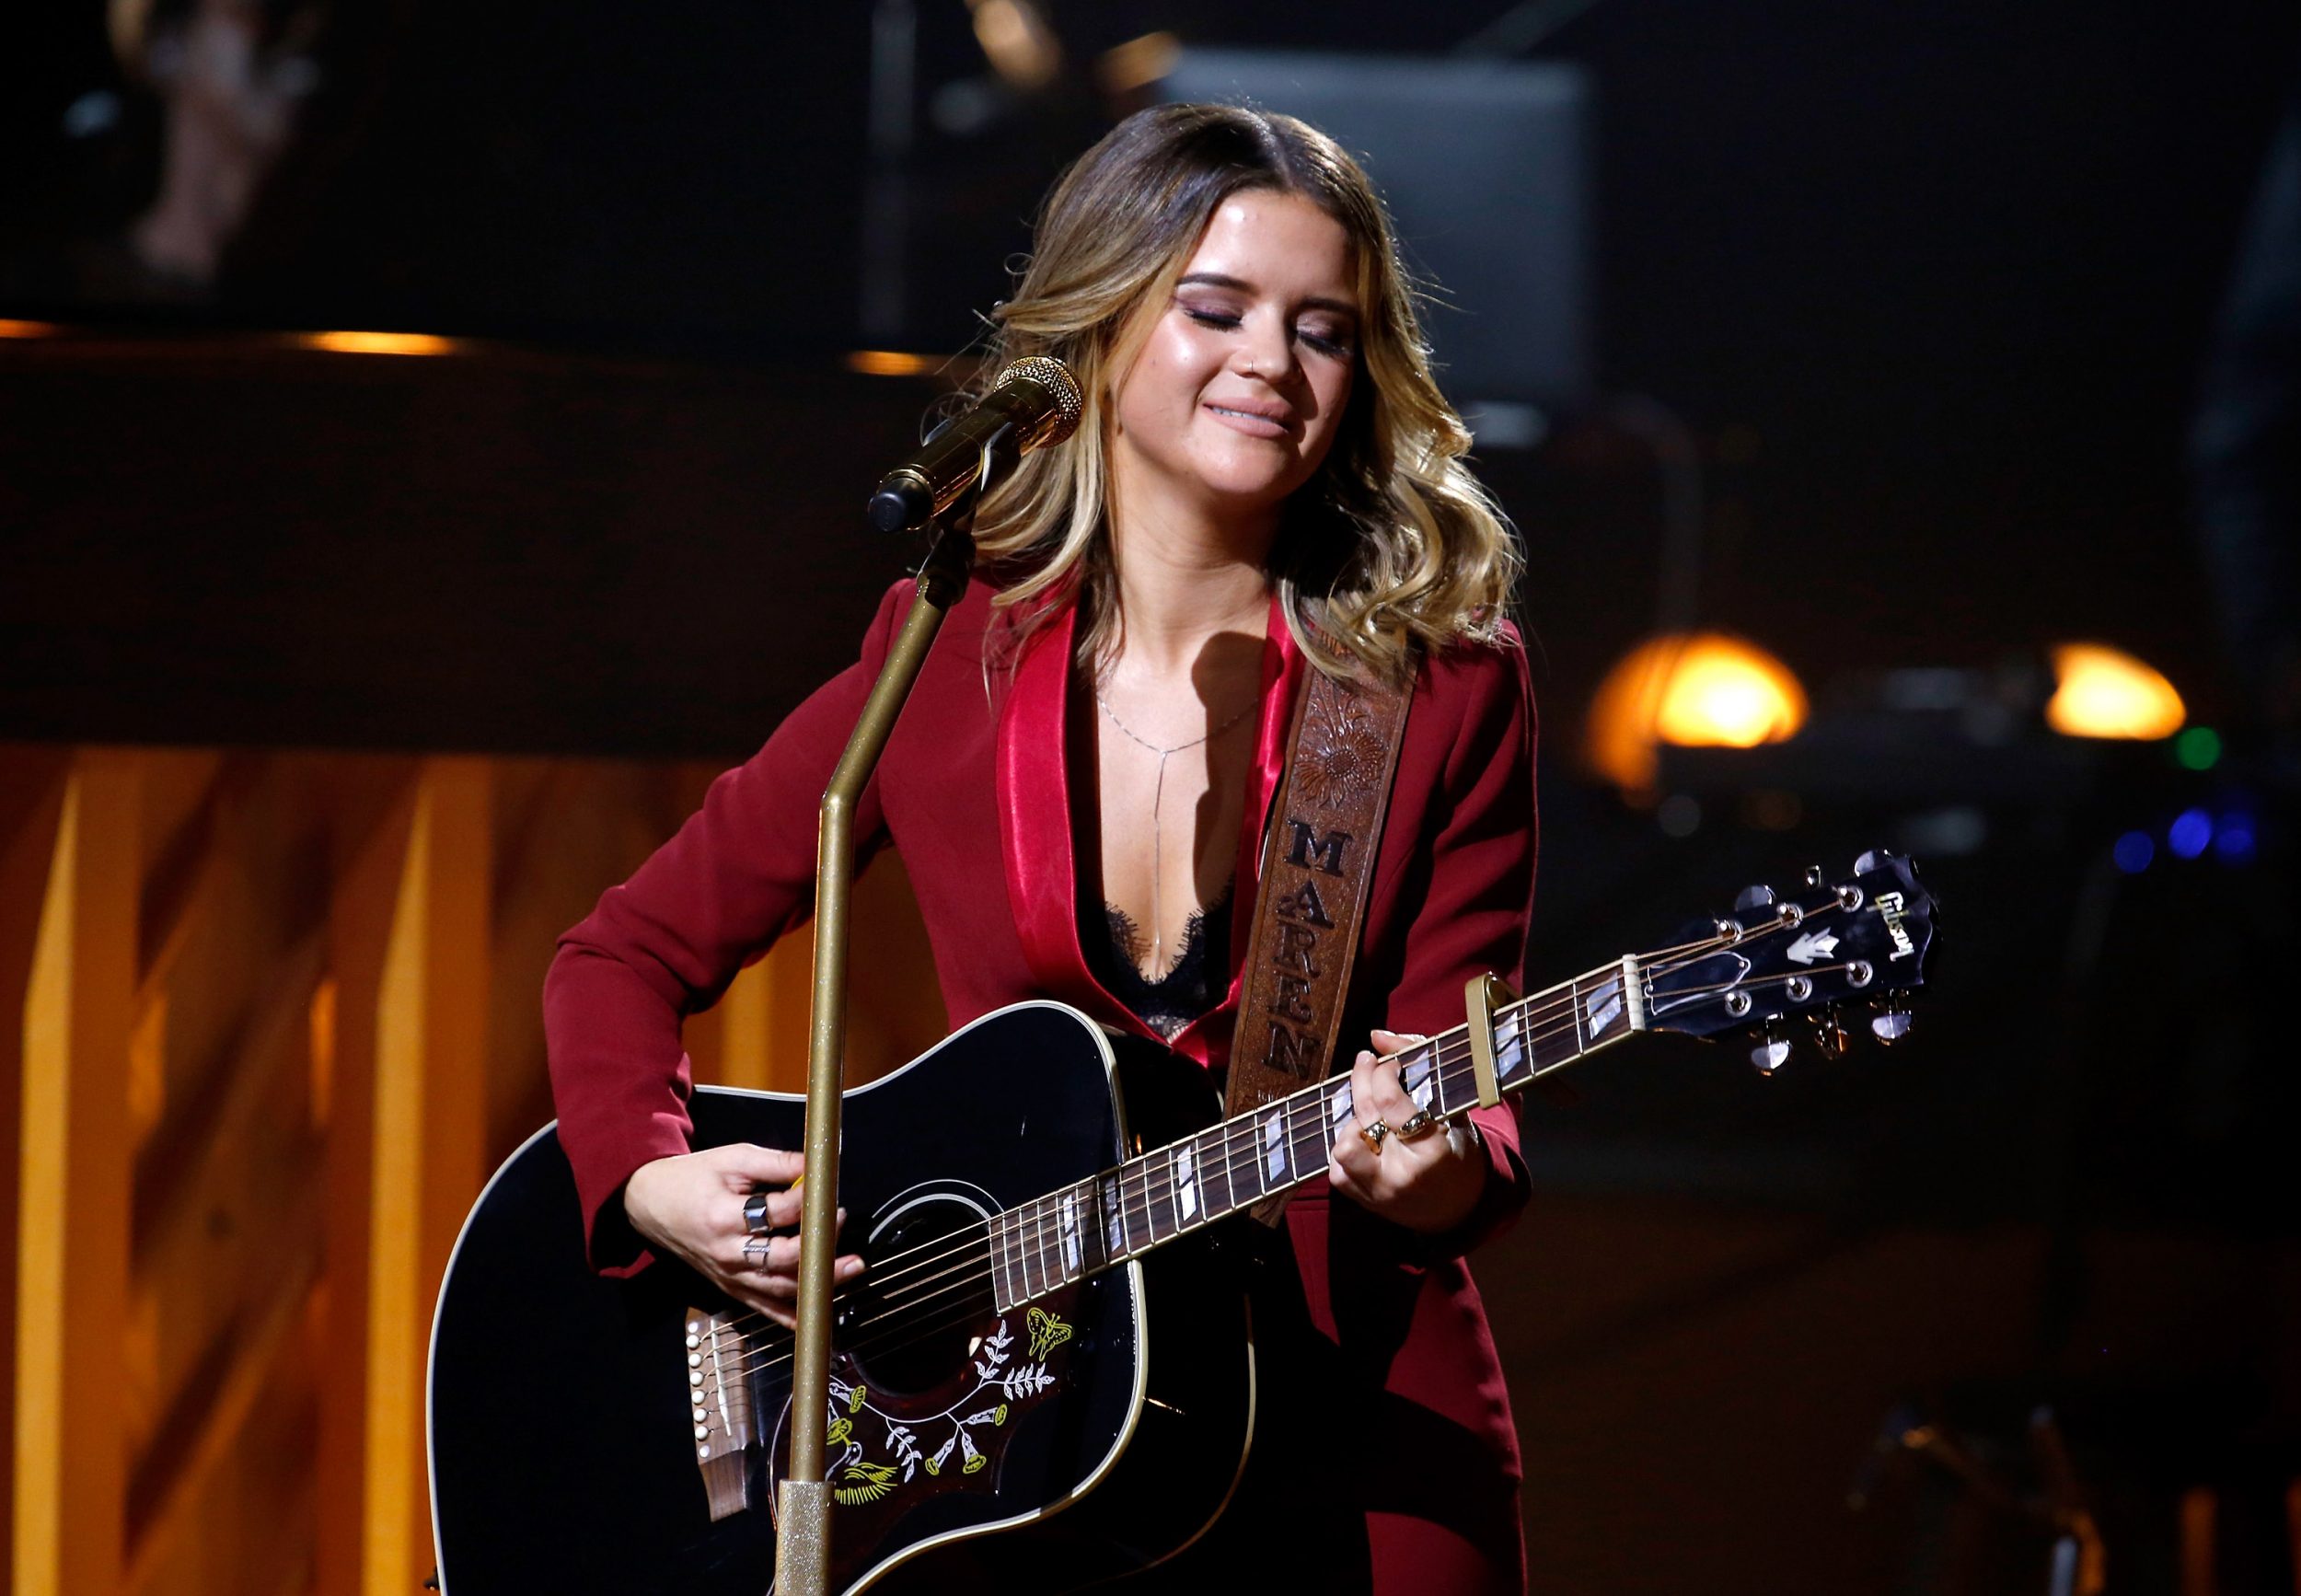 FRANKLIN, TN - AUGUST 31:  Singer-songwriter Maren Morris performs onstage during CMT Crossroads: Alicia Keys and Maren Morris on August 31, 2016 in Nashville, Tennessee.  (Photo by Terry Wyatt/Getty Images for CMT)